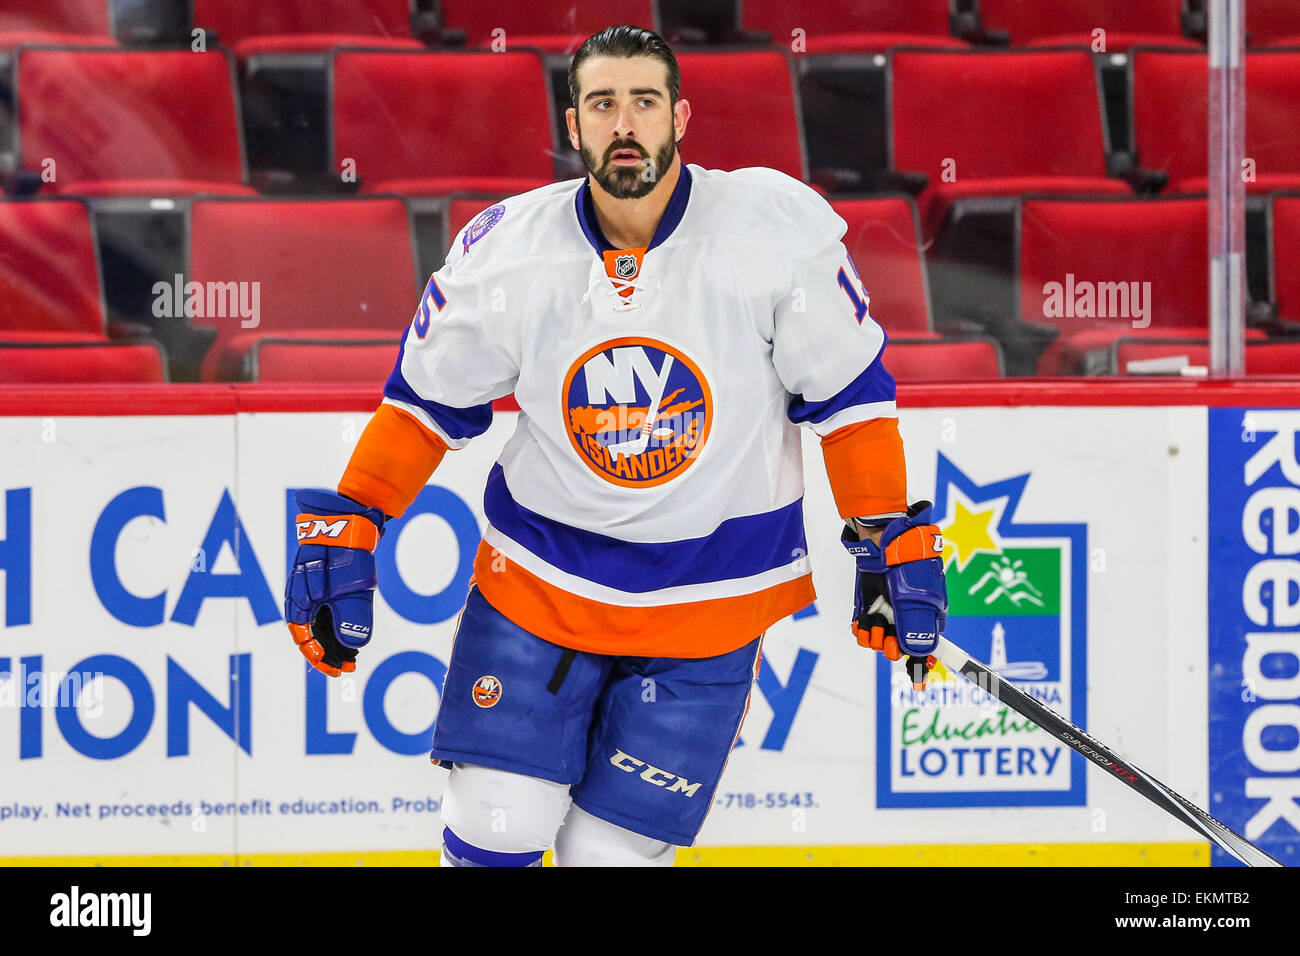 Islanders, Cal Clutterbuck agree to 5-year extension - Sports